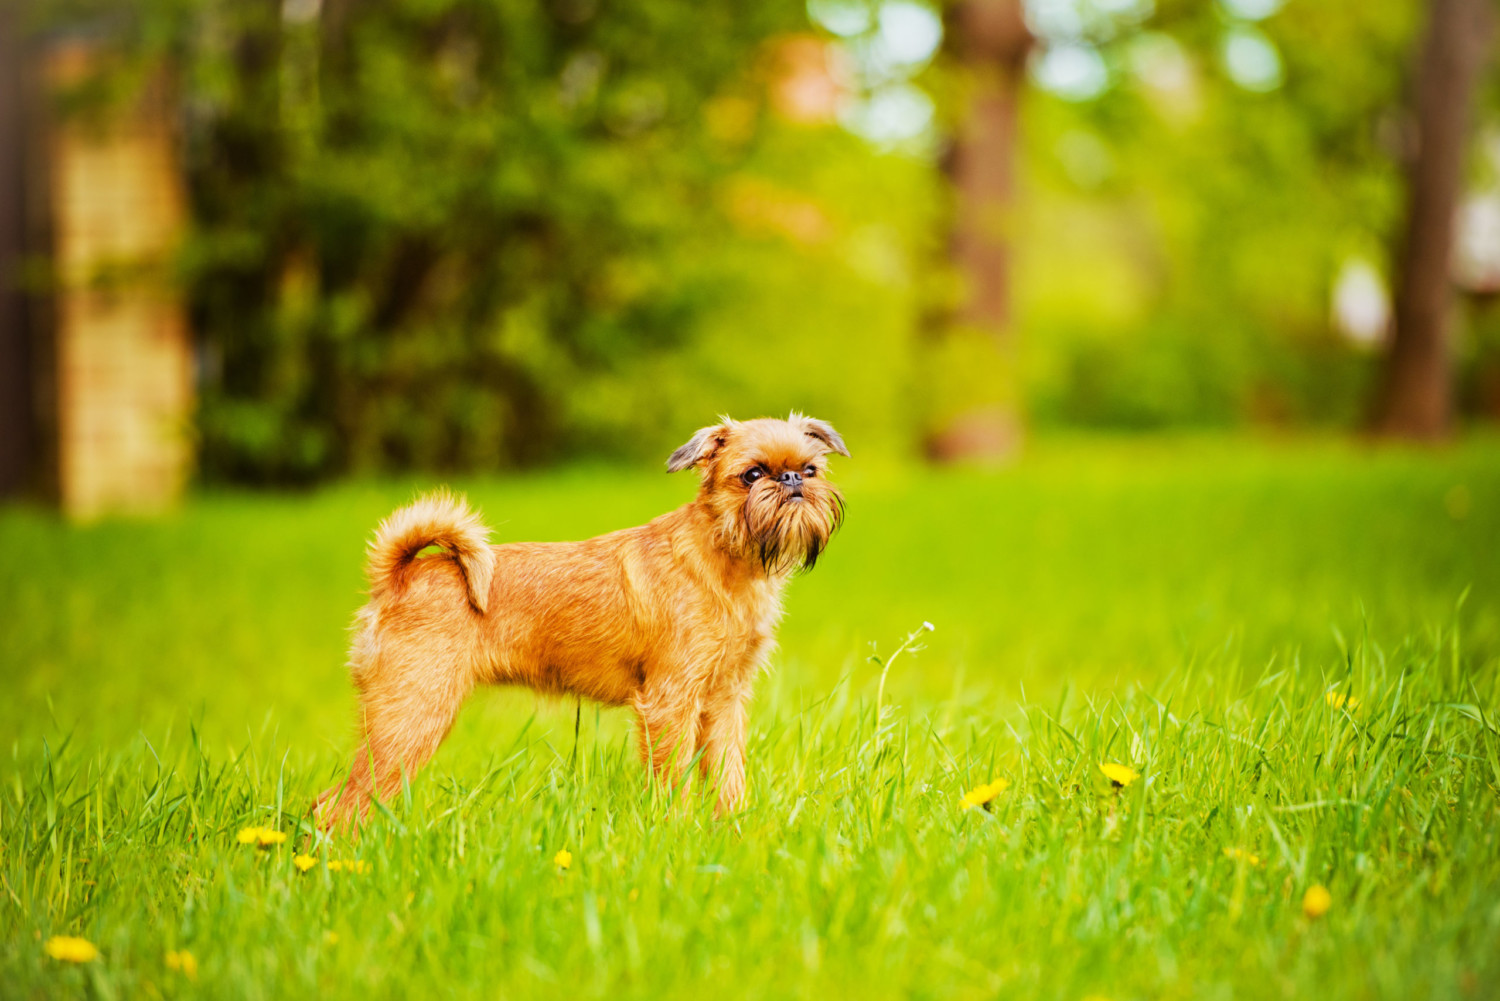 small energetic dog breeds